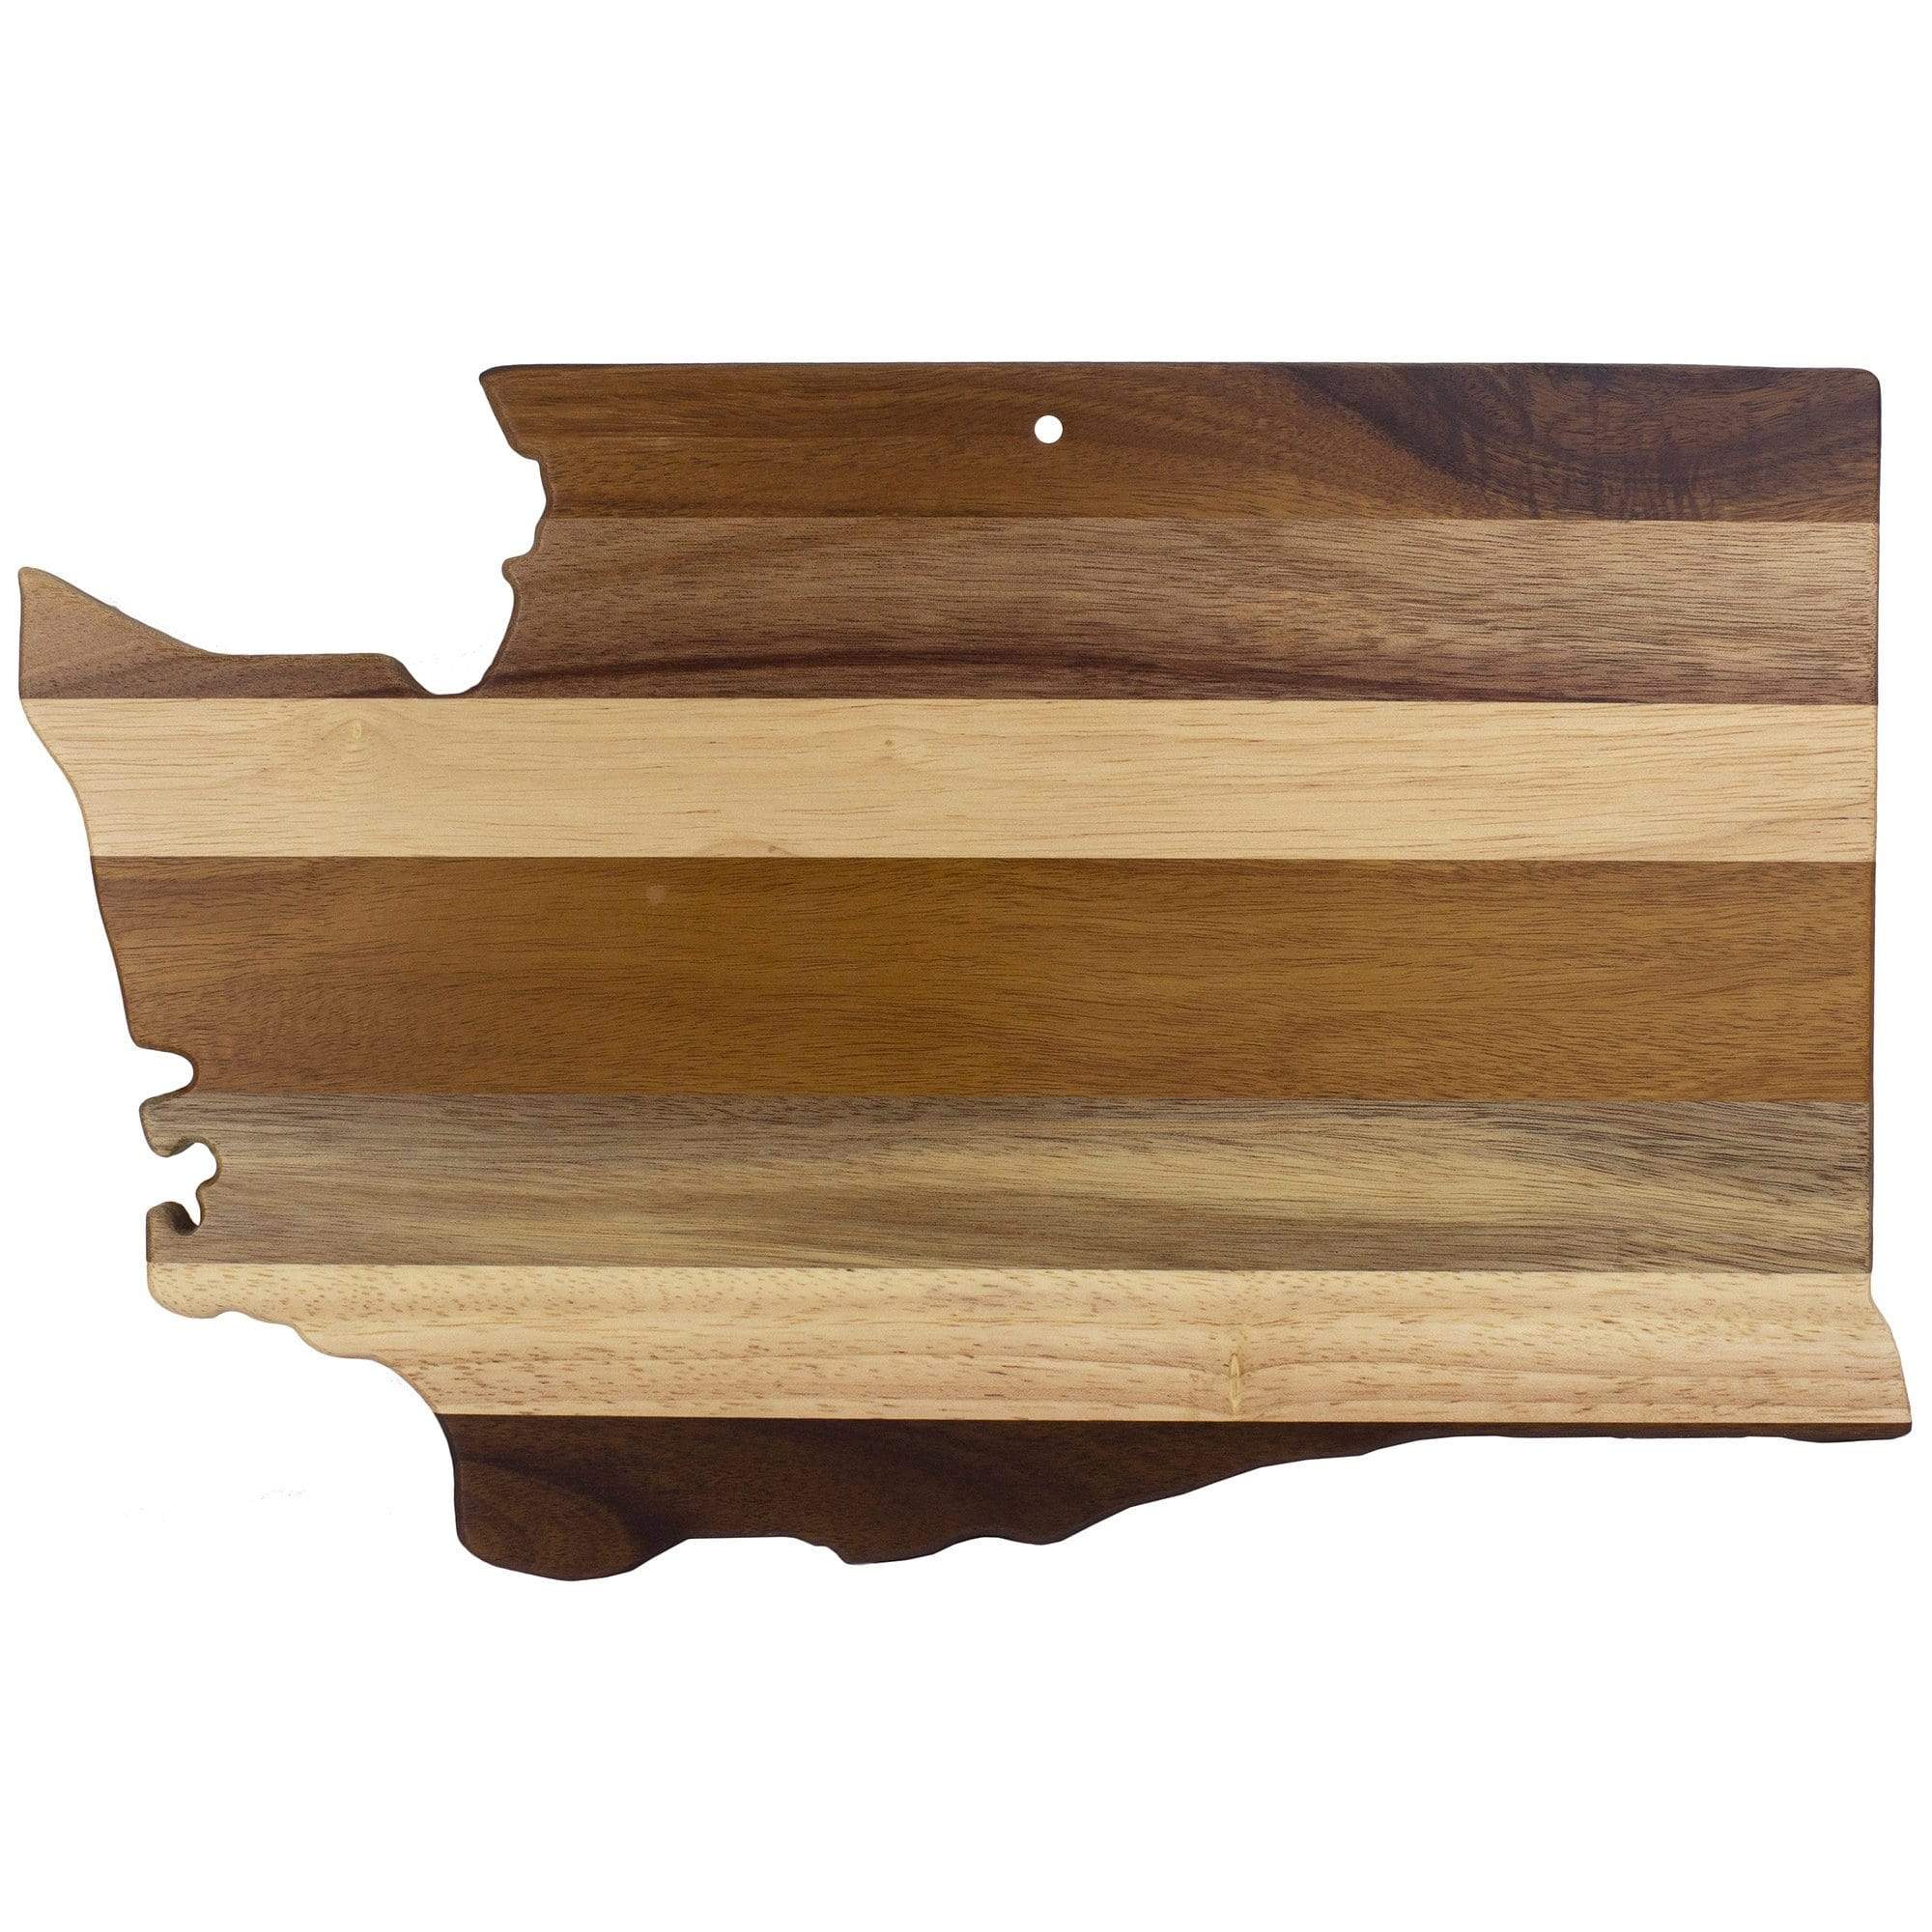 https://totallybamboo.com/cdn/shop/products/rock-branchr-shiplap-series-washington-state-shaped-wood-serving-and-cutting-board-totally-bamboo-931929.jpg?v=1627837204